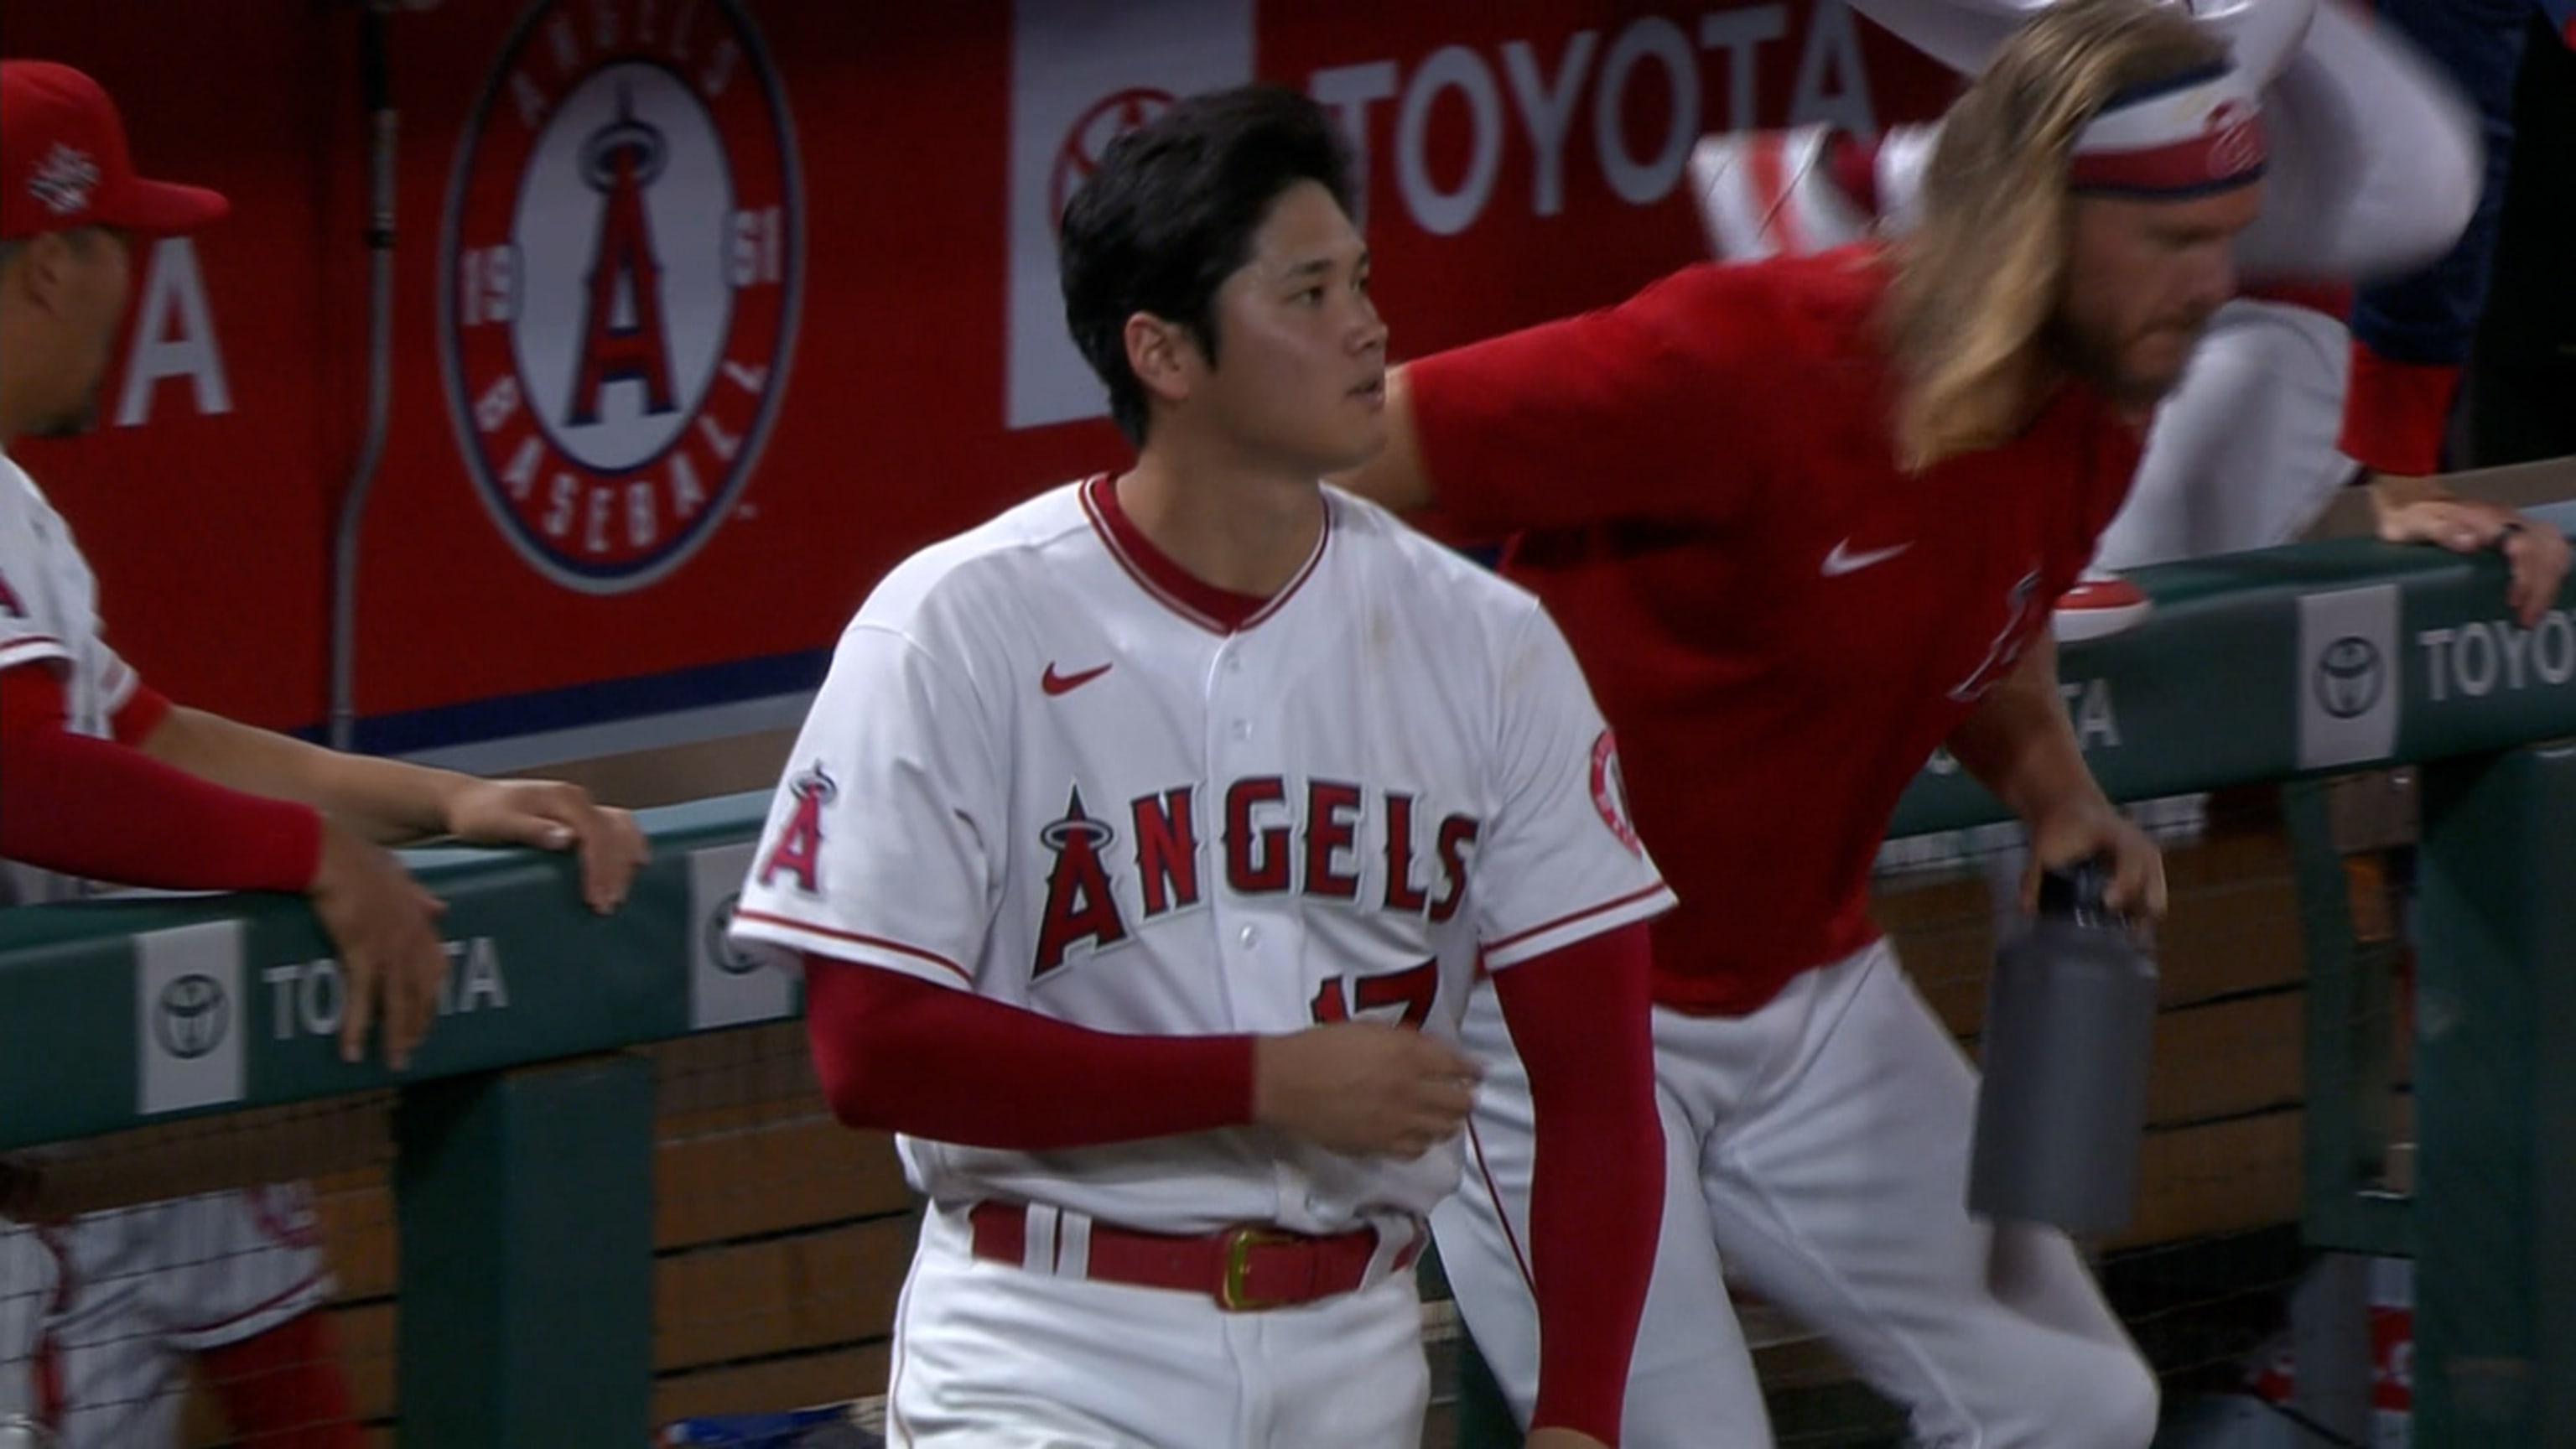 Shohei Ohtani strikes out 11, Angels beat Royals 2-0 – WWLP